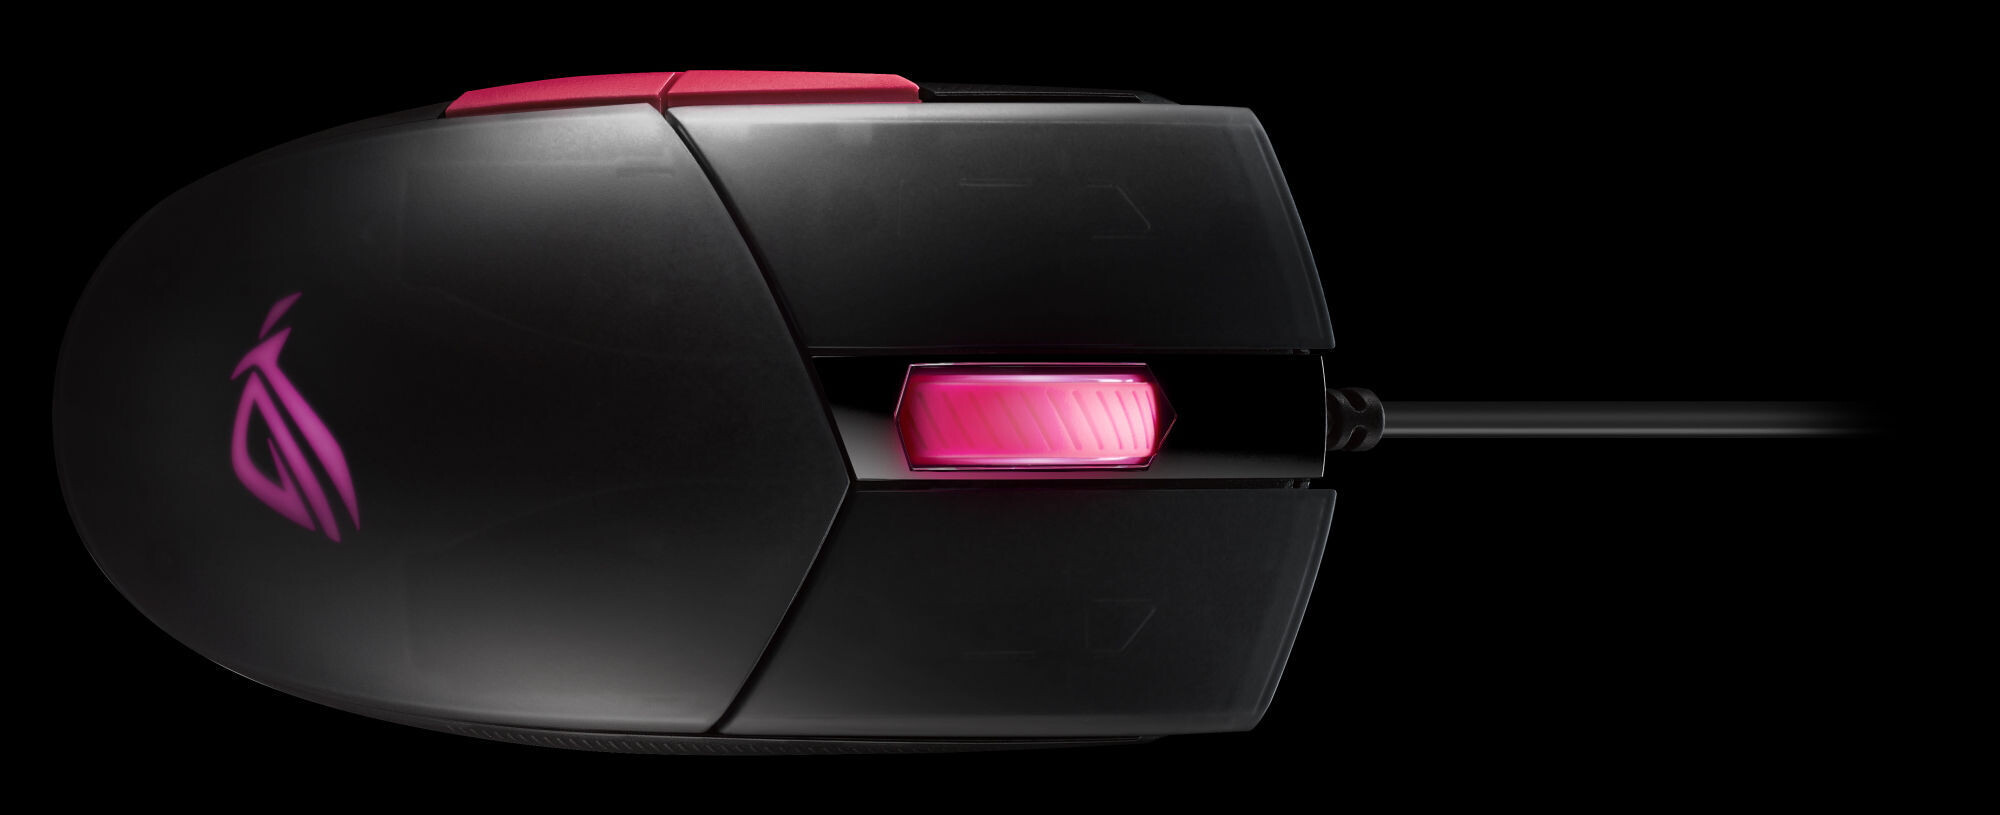 Asus Announces Electro Punk Gaming Laptops And Peripherals Techpowerup